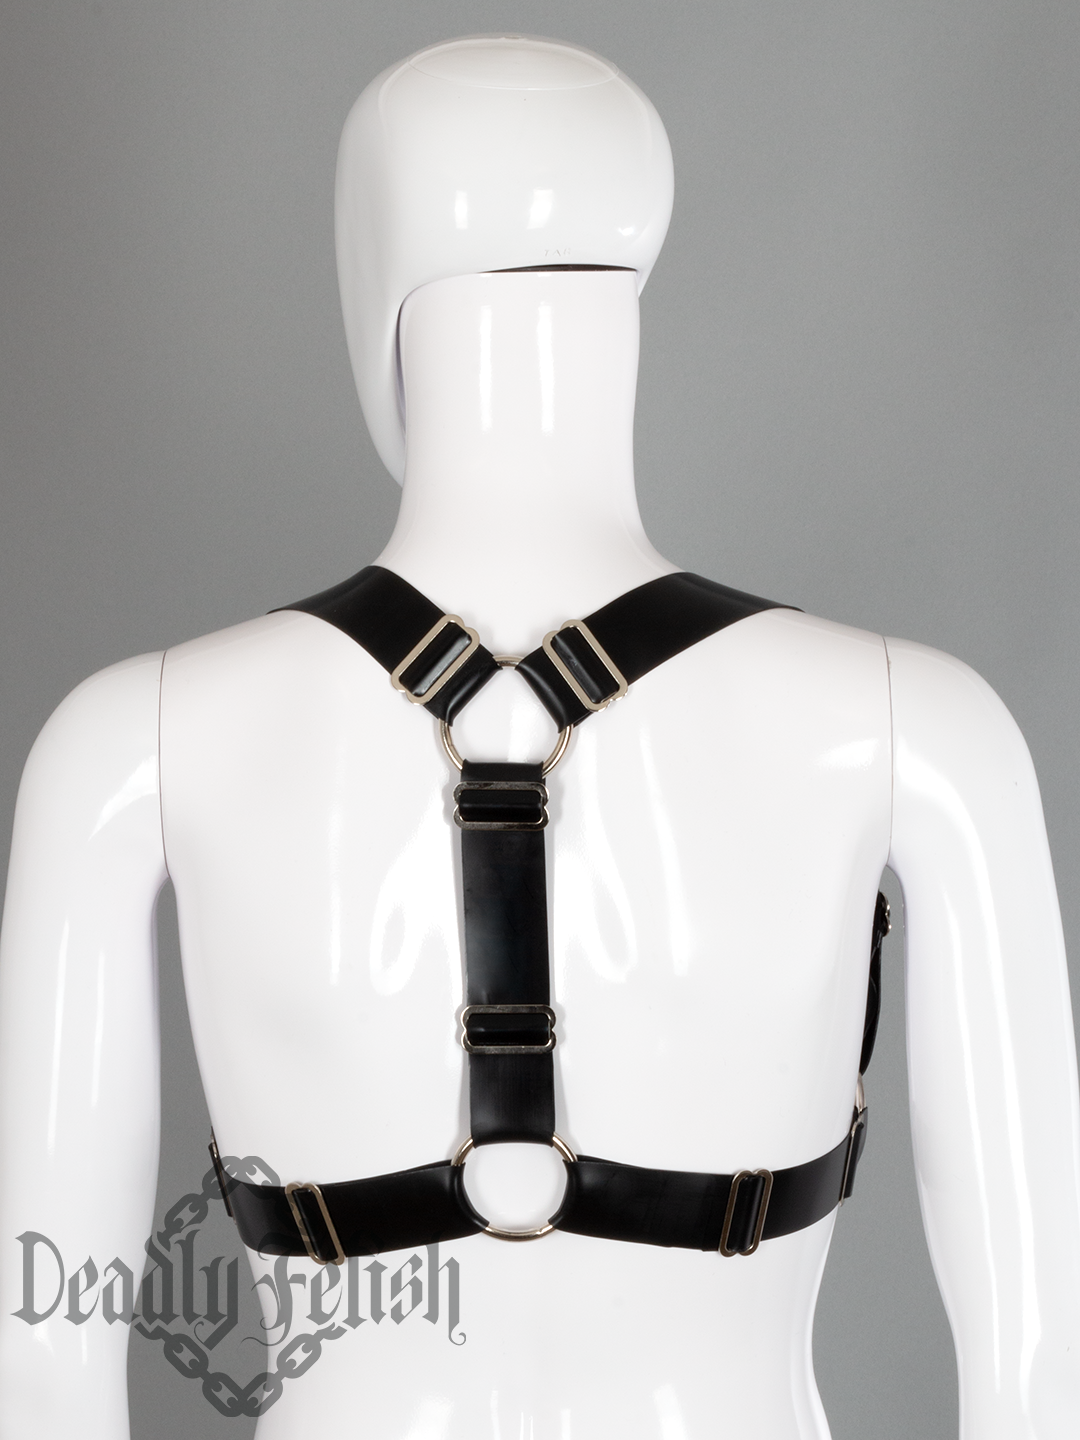 Deadly Fetish Made-to-Order Latex: Basic Harness #27